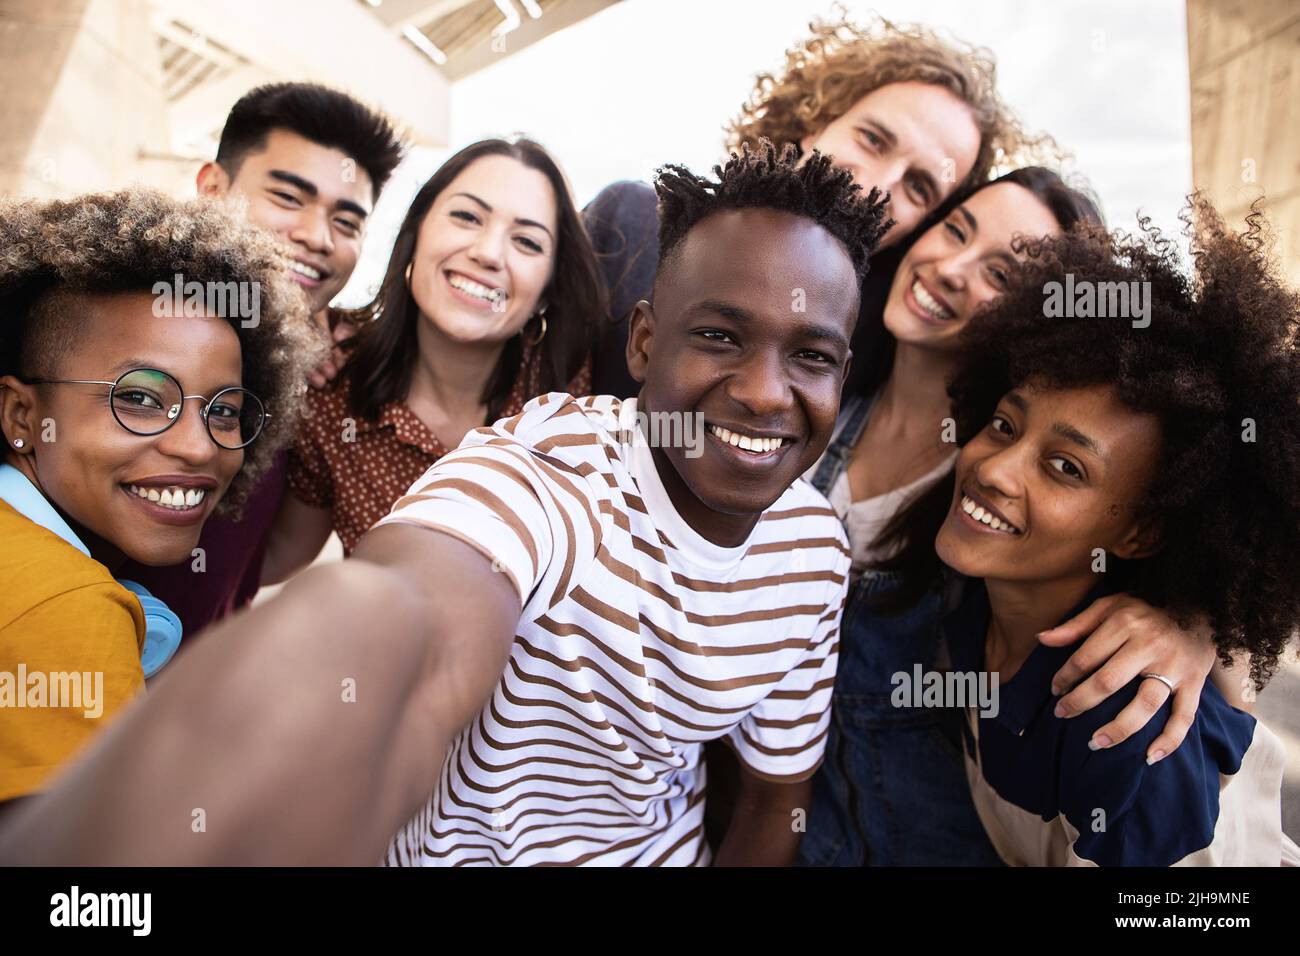 Group of happy young people taking selfie portrait together outdoor Stock Photo